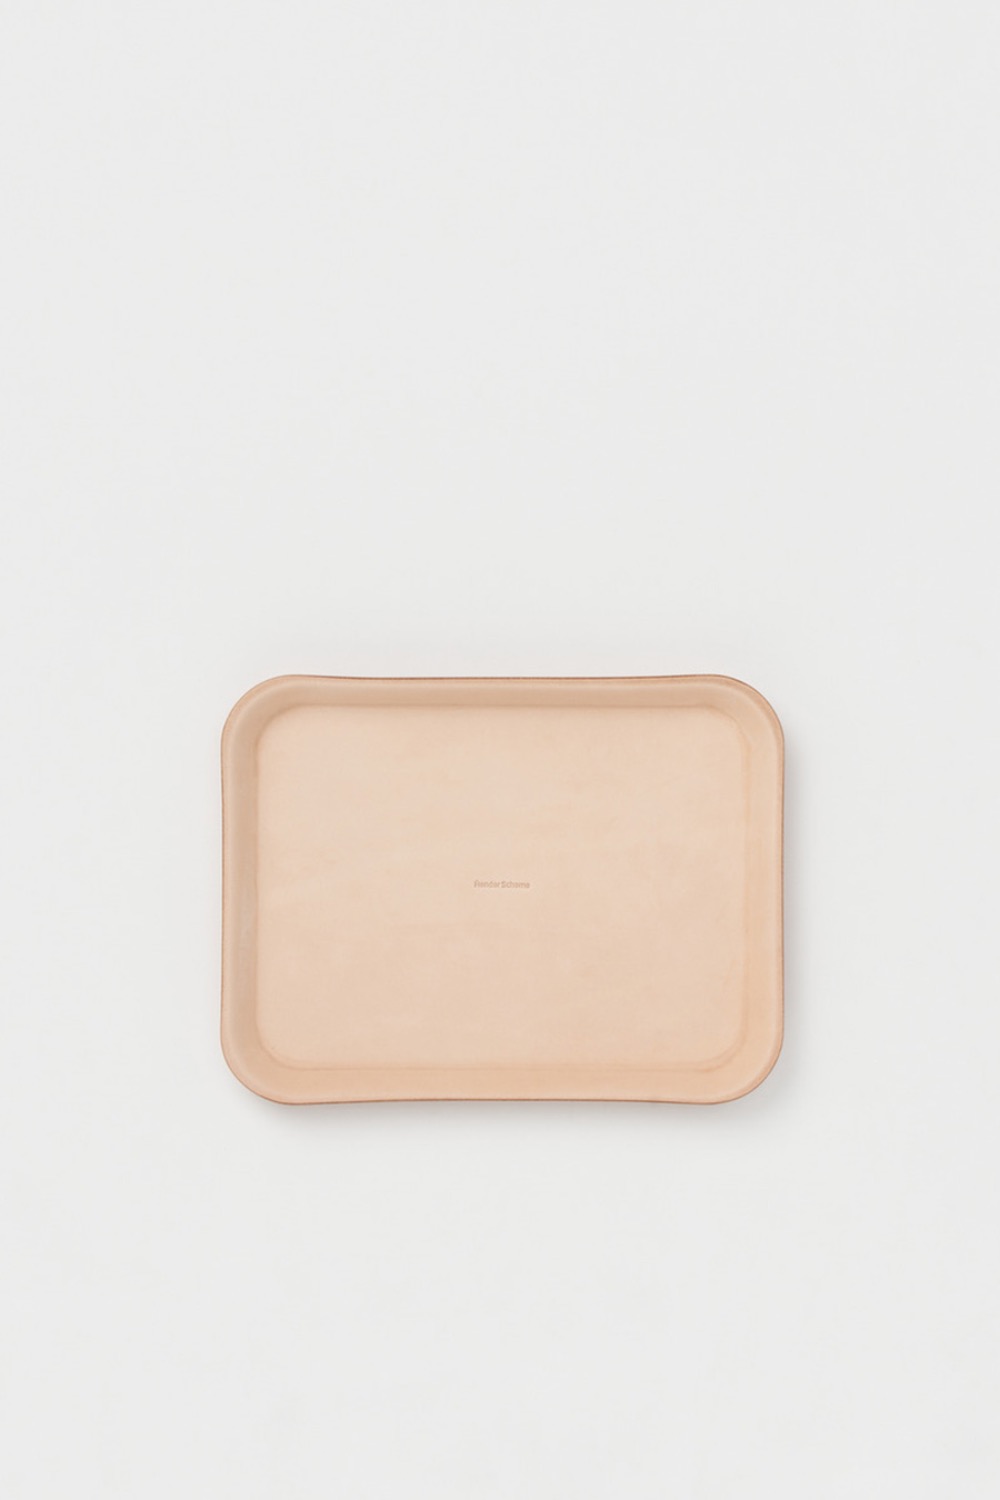 [RESTOCK] LEATHER TRAY M